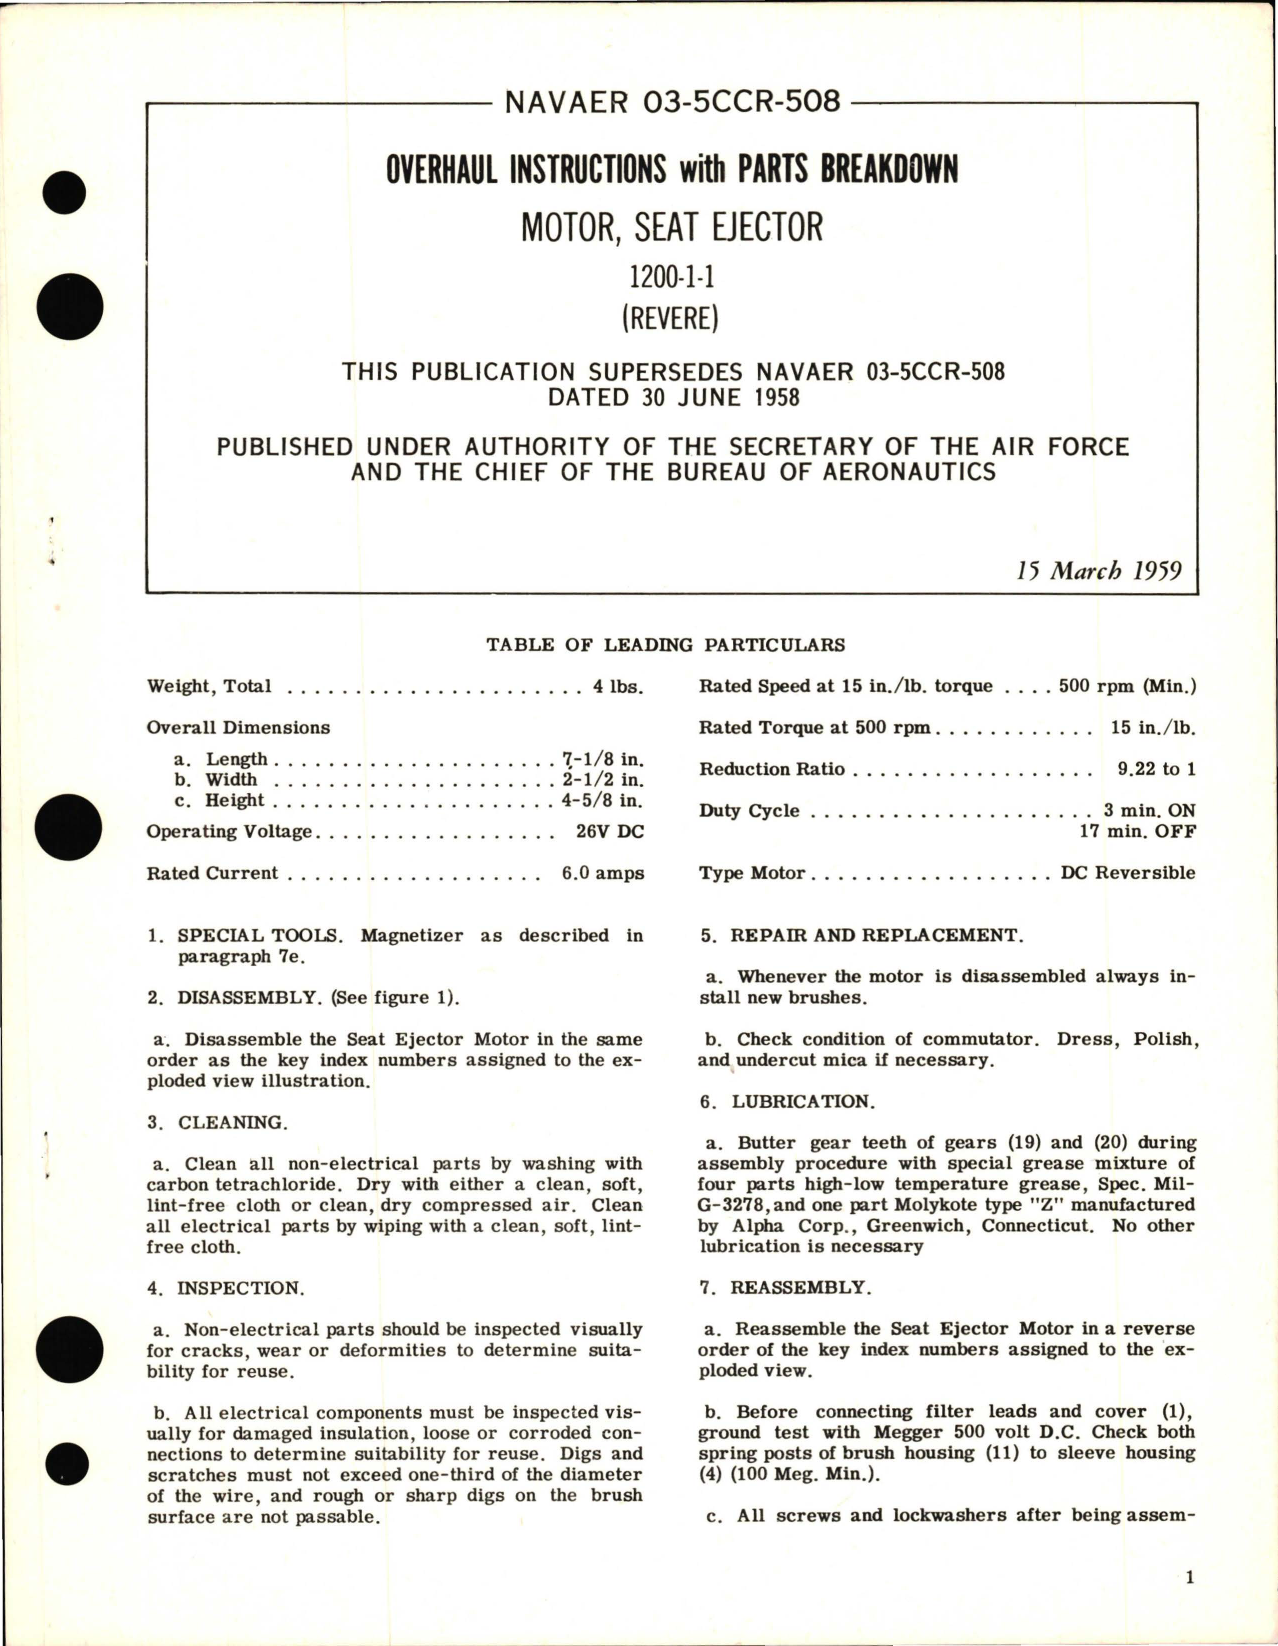 Sample page 1 from AirCorps Library document: Overhaul Instructions with Parts Breakdown for Motor, Seat Ejector 1200-1-1